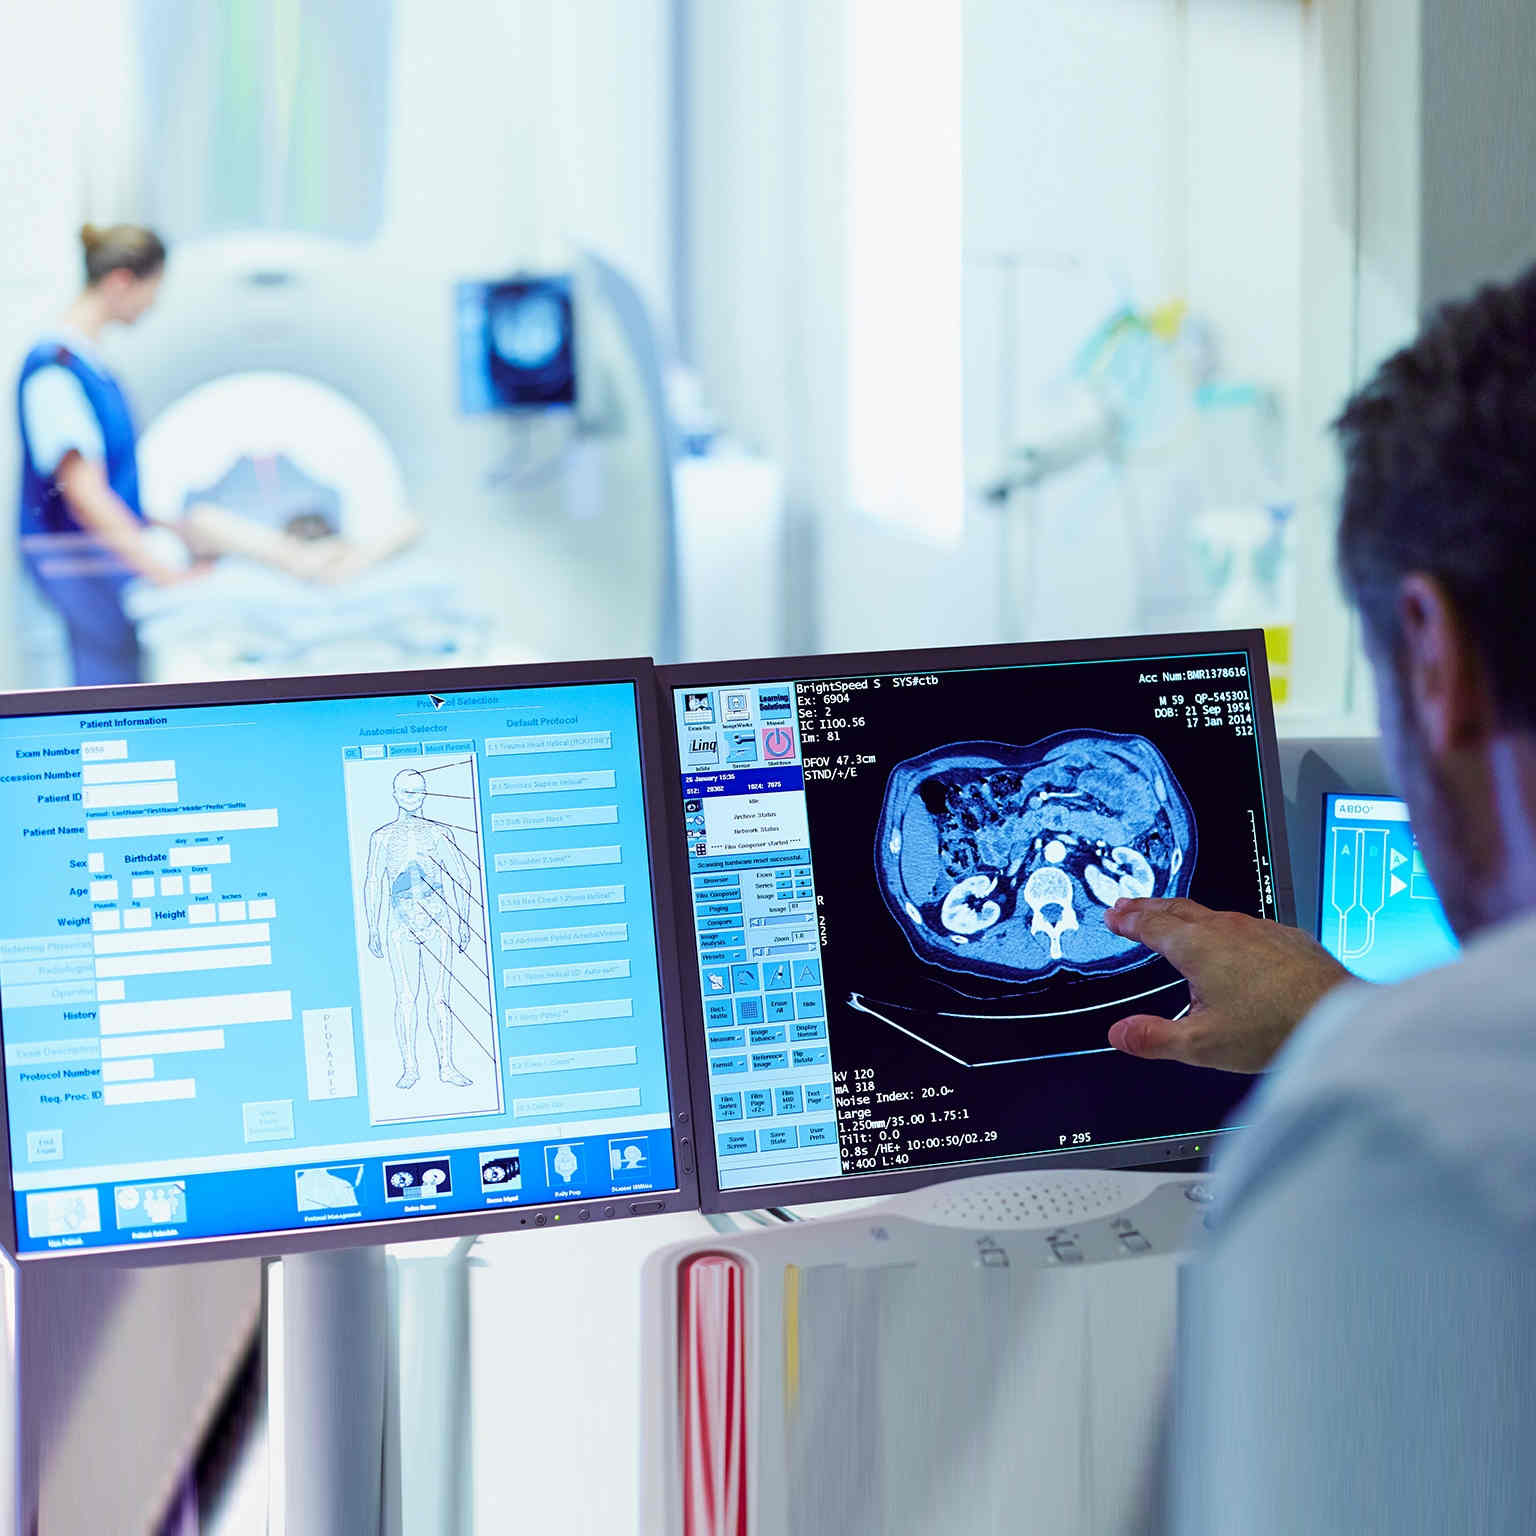 Transforming healthcare with AI: The impact on the workforce and organizations